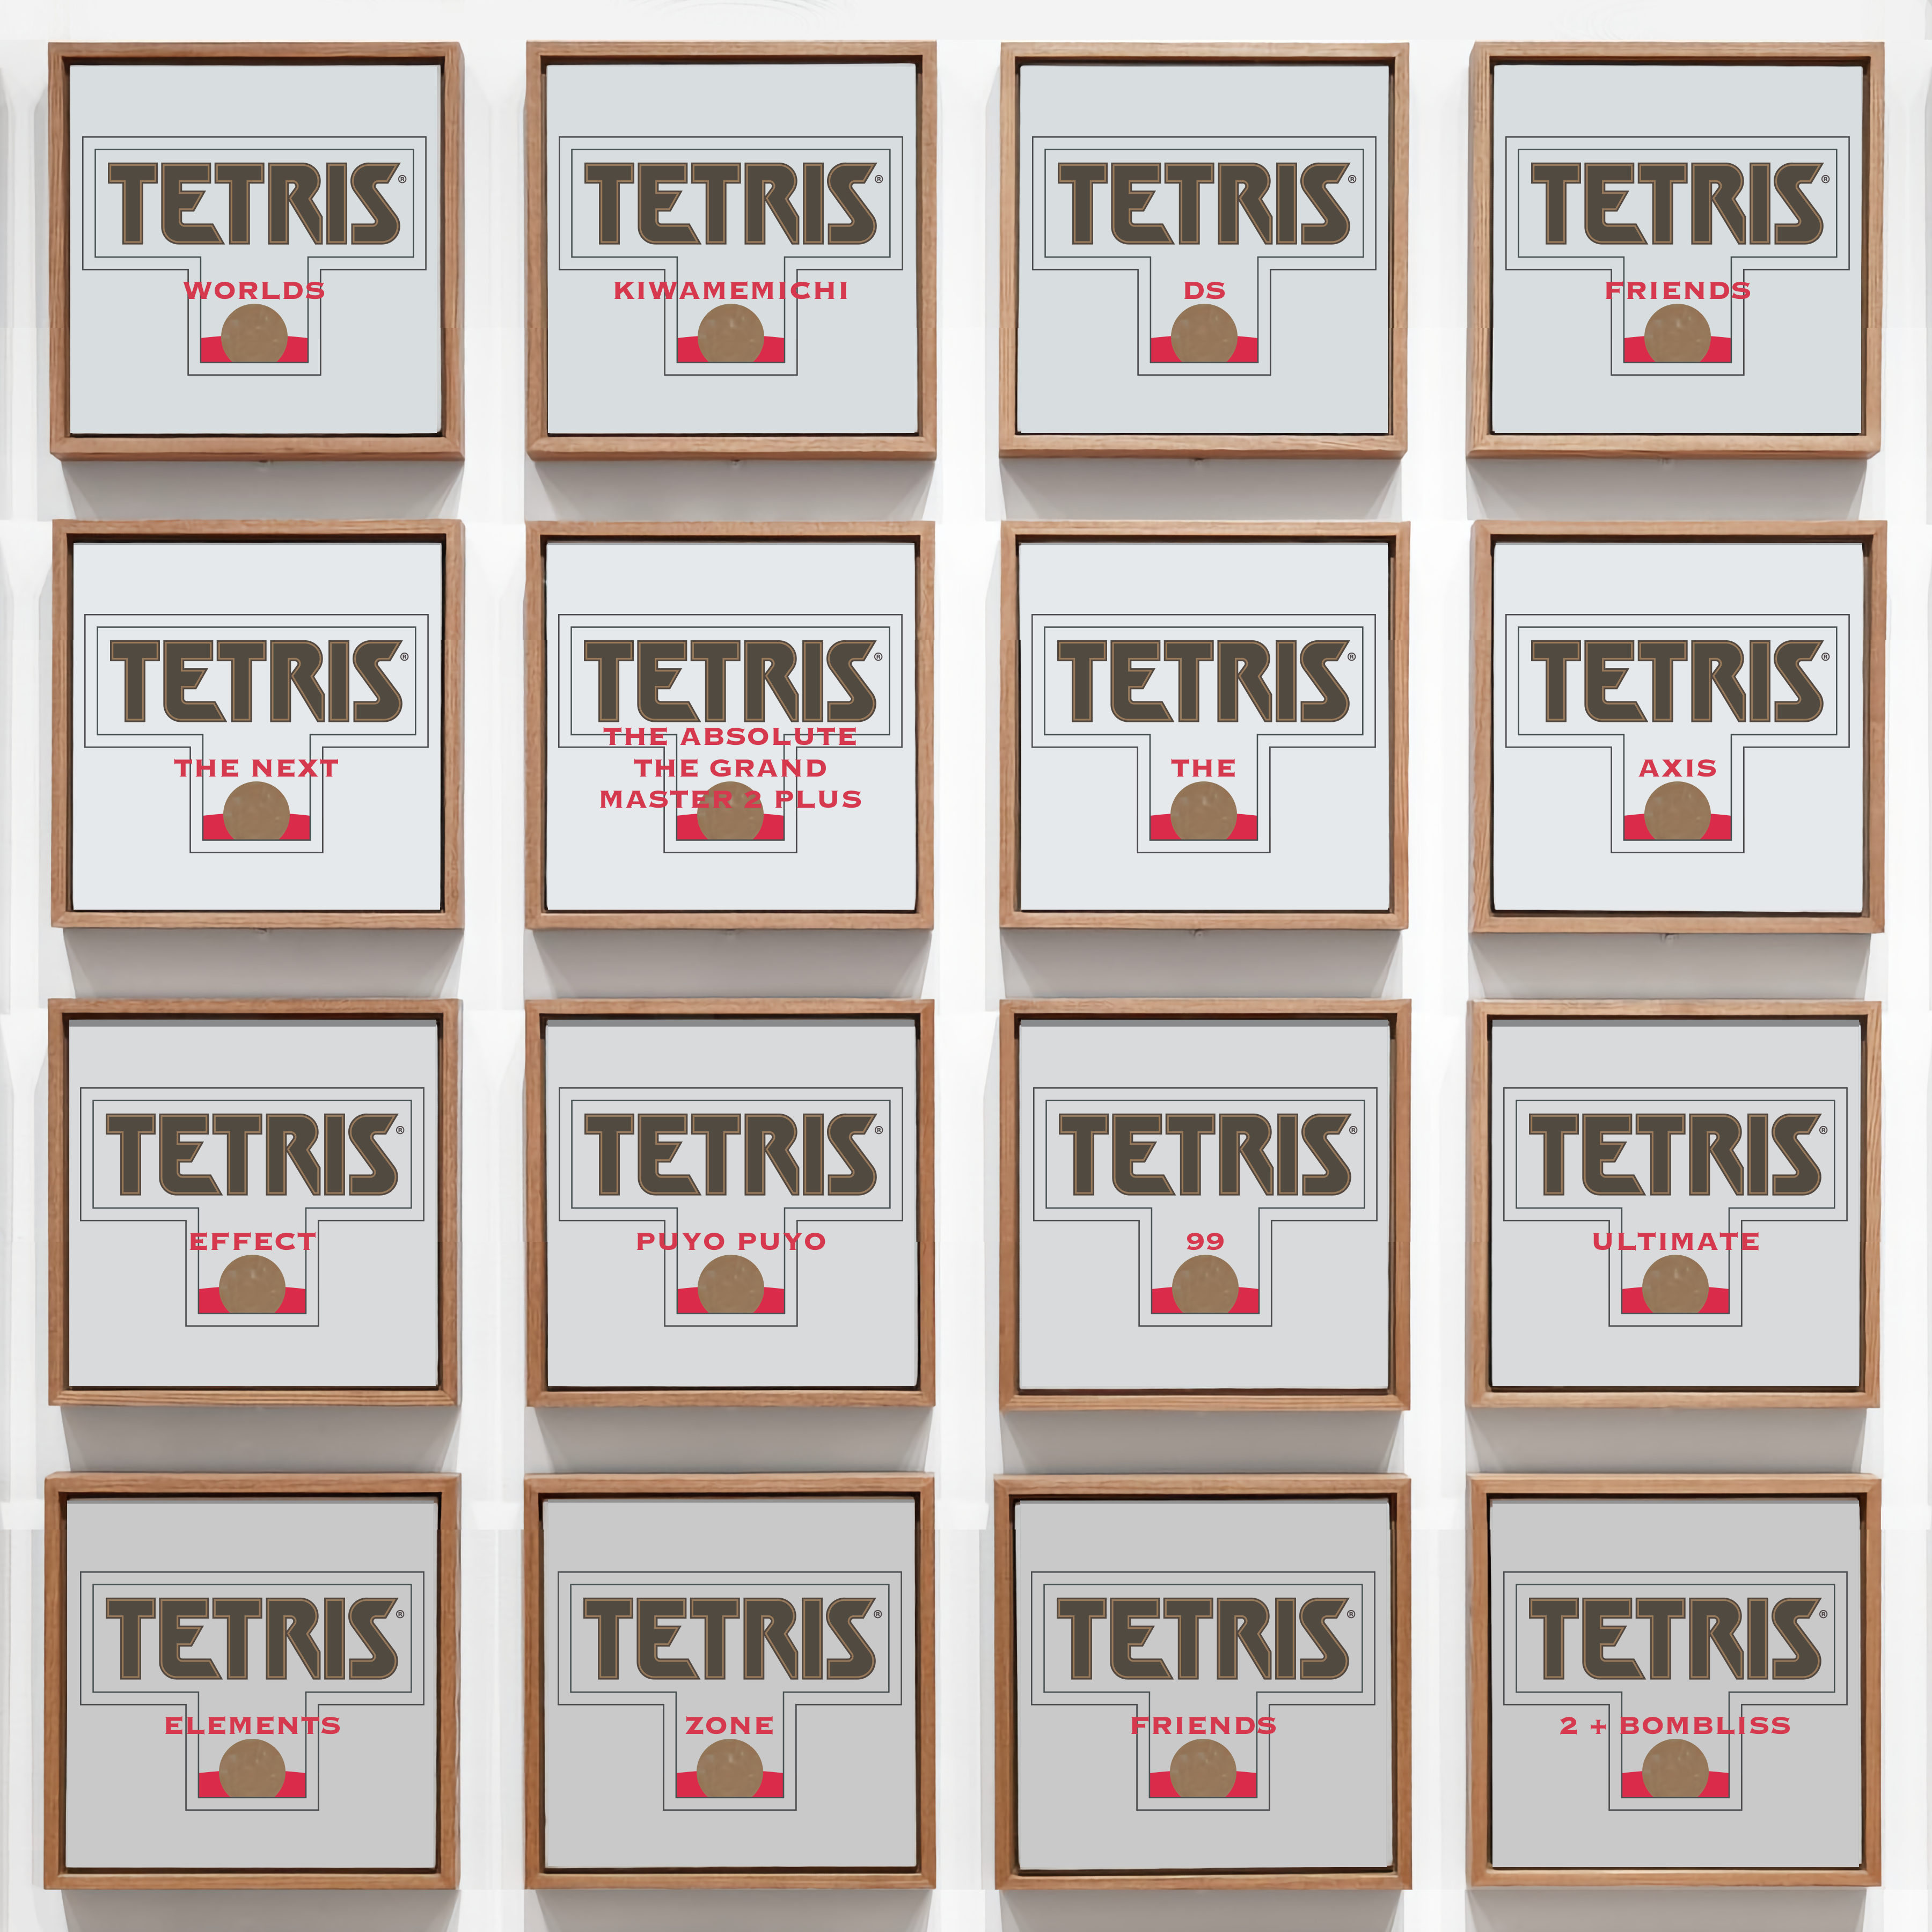 A photo of Andy Warhol's Campbell soup paintings but instead of Campbell soup cans it's Tetris logos with different subtitles.